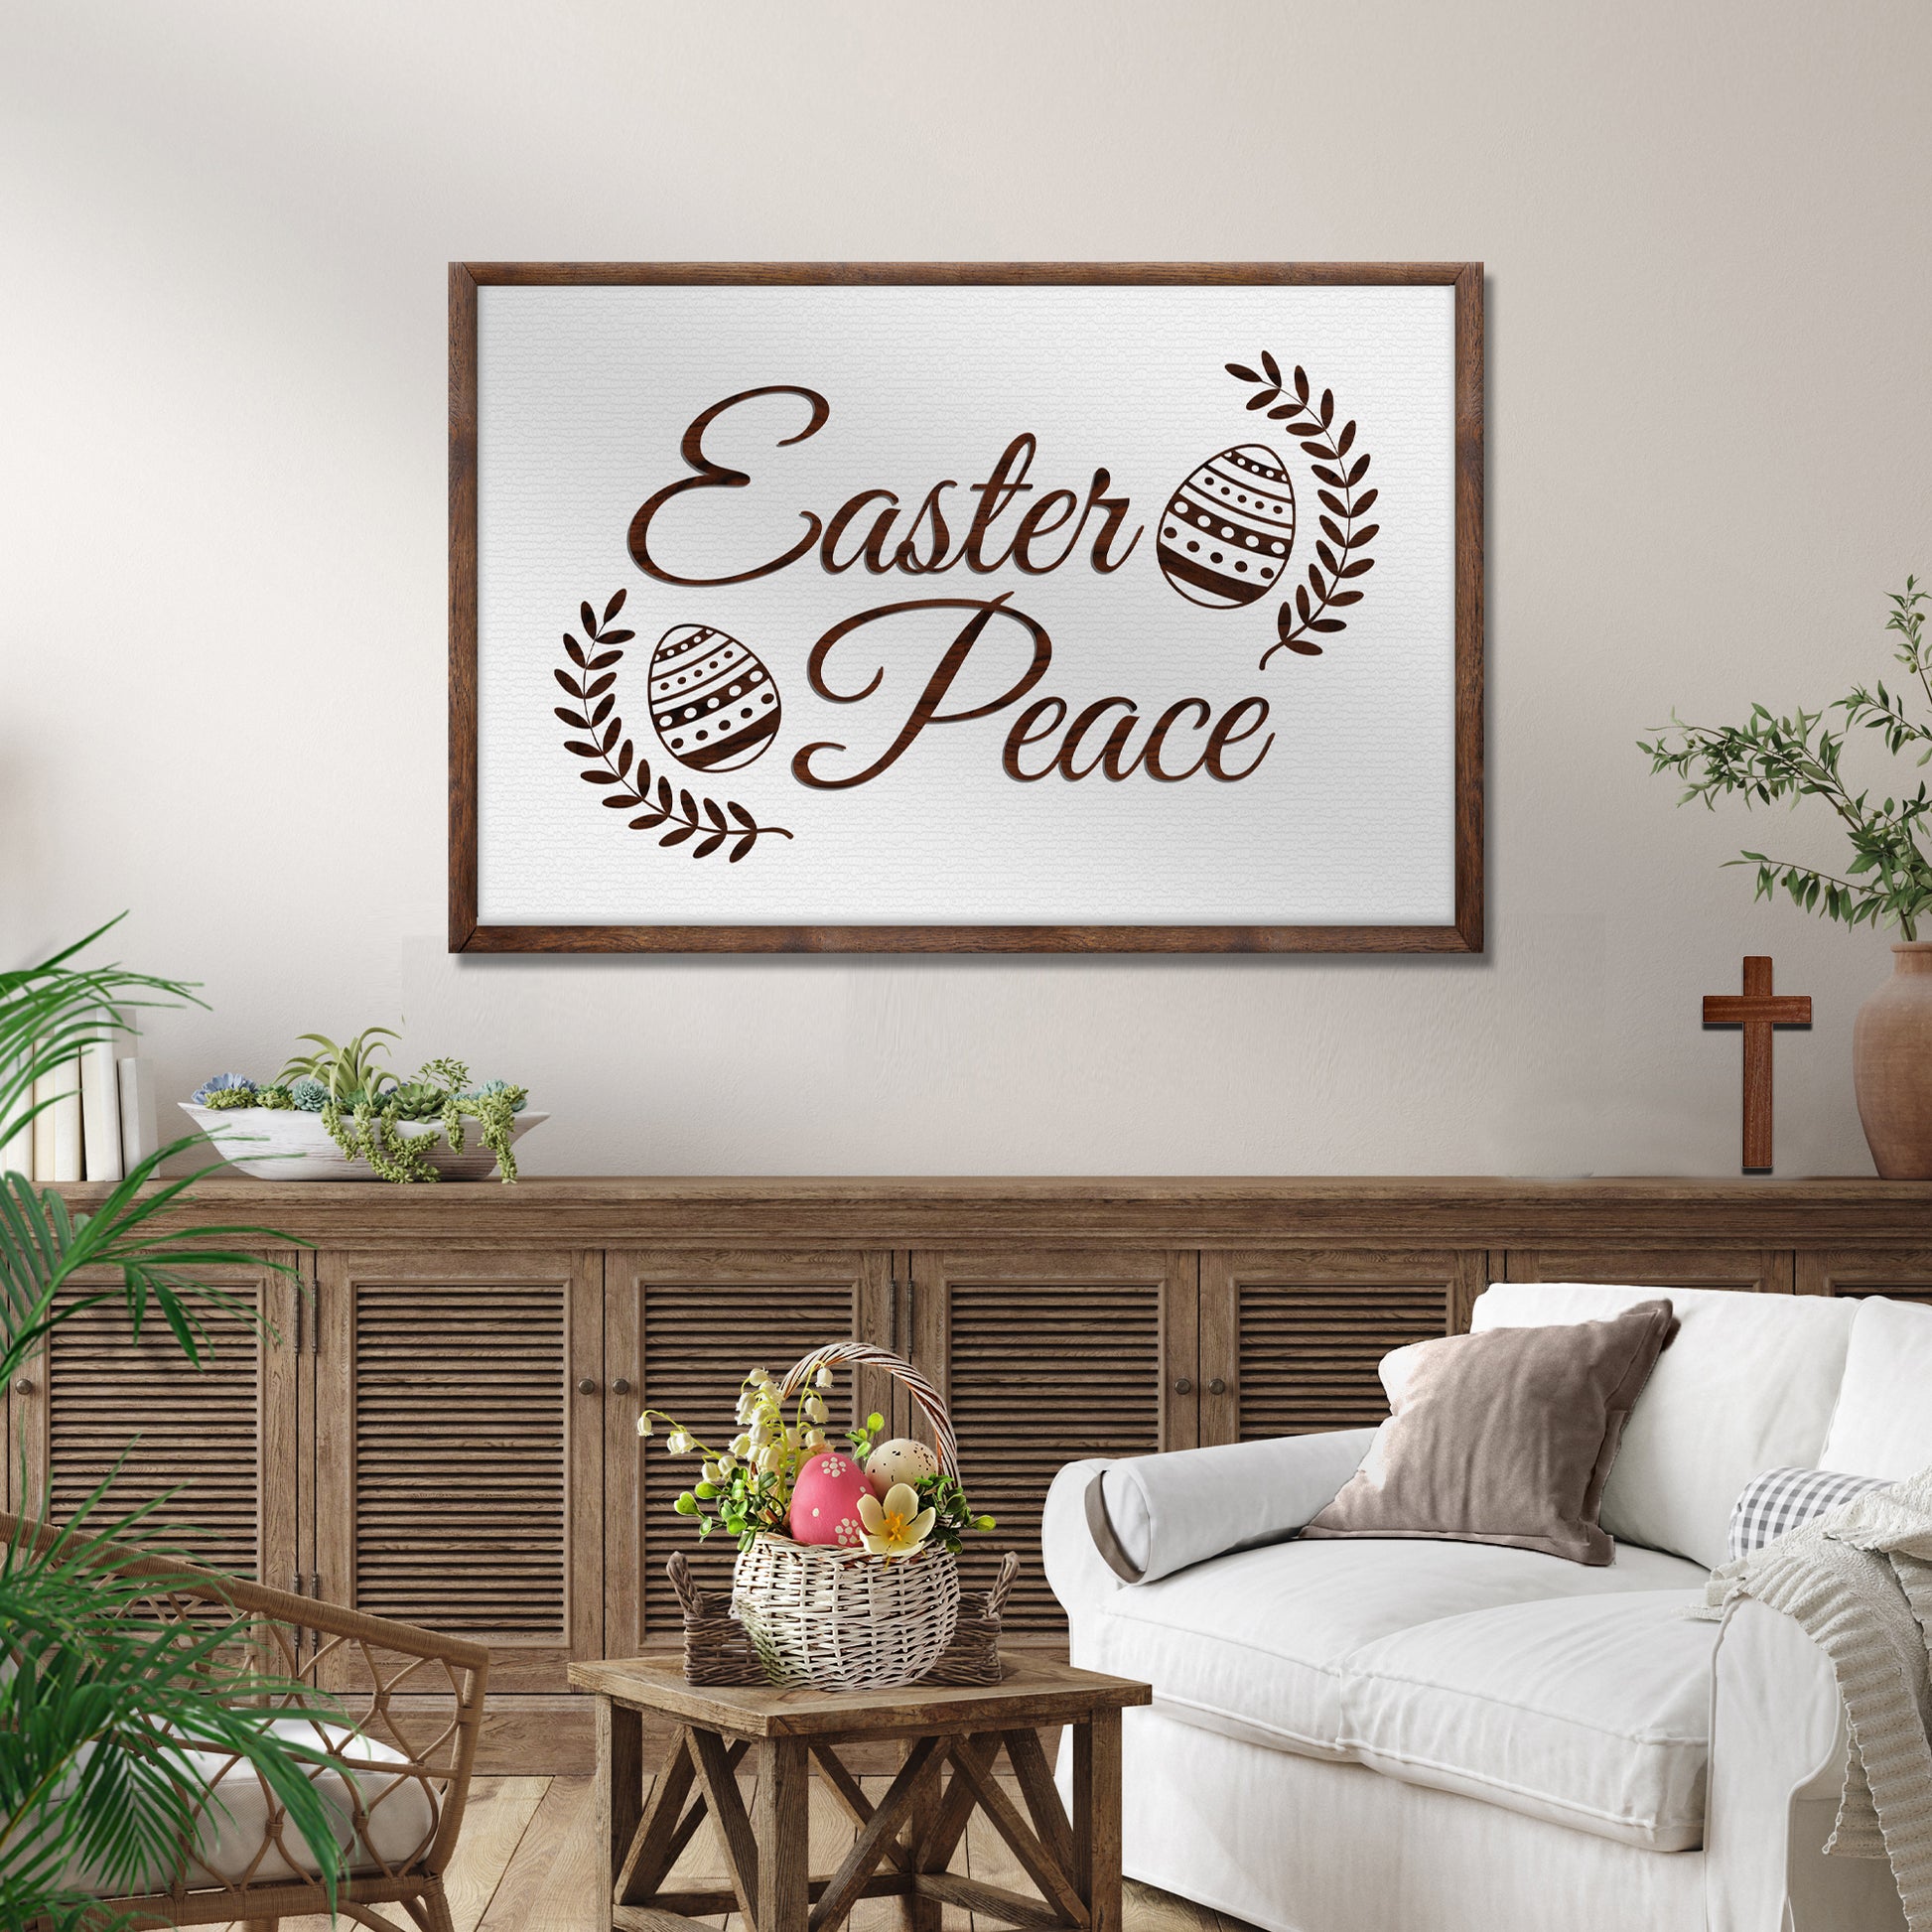 Easter Peace Sign - Image by Tailored Canvases